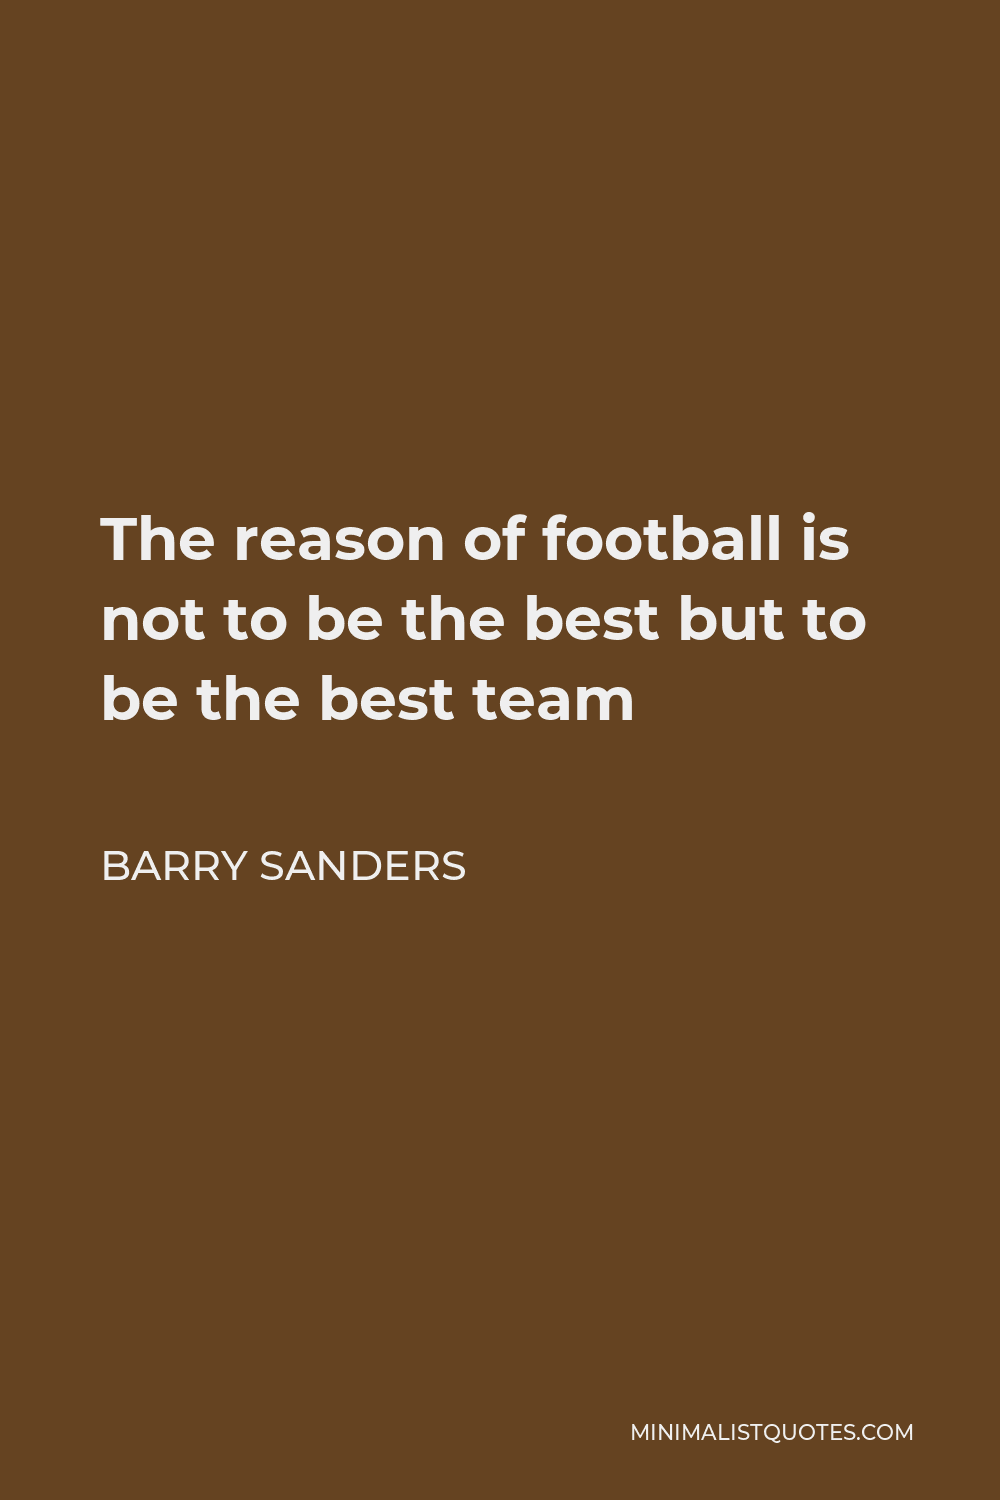 Barry Sanders Quote - The reason of football is not to be the best but to be the best team